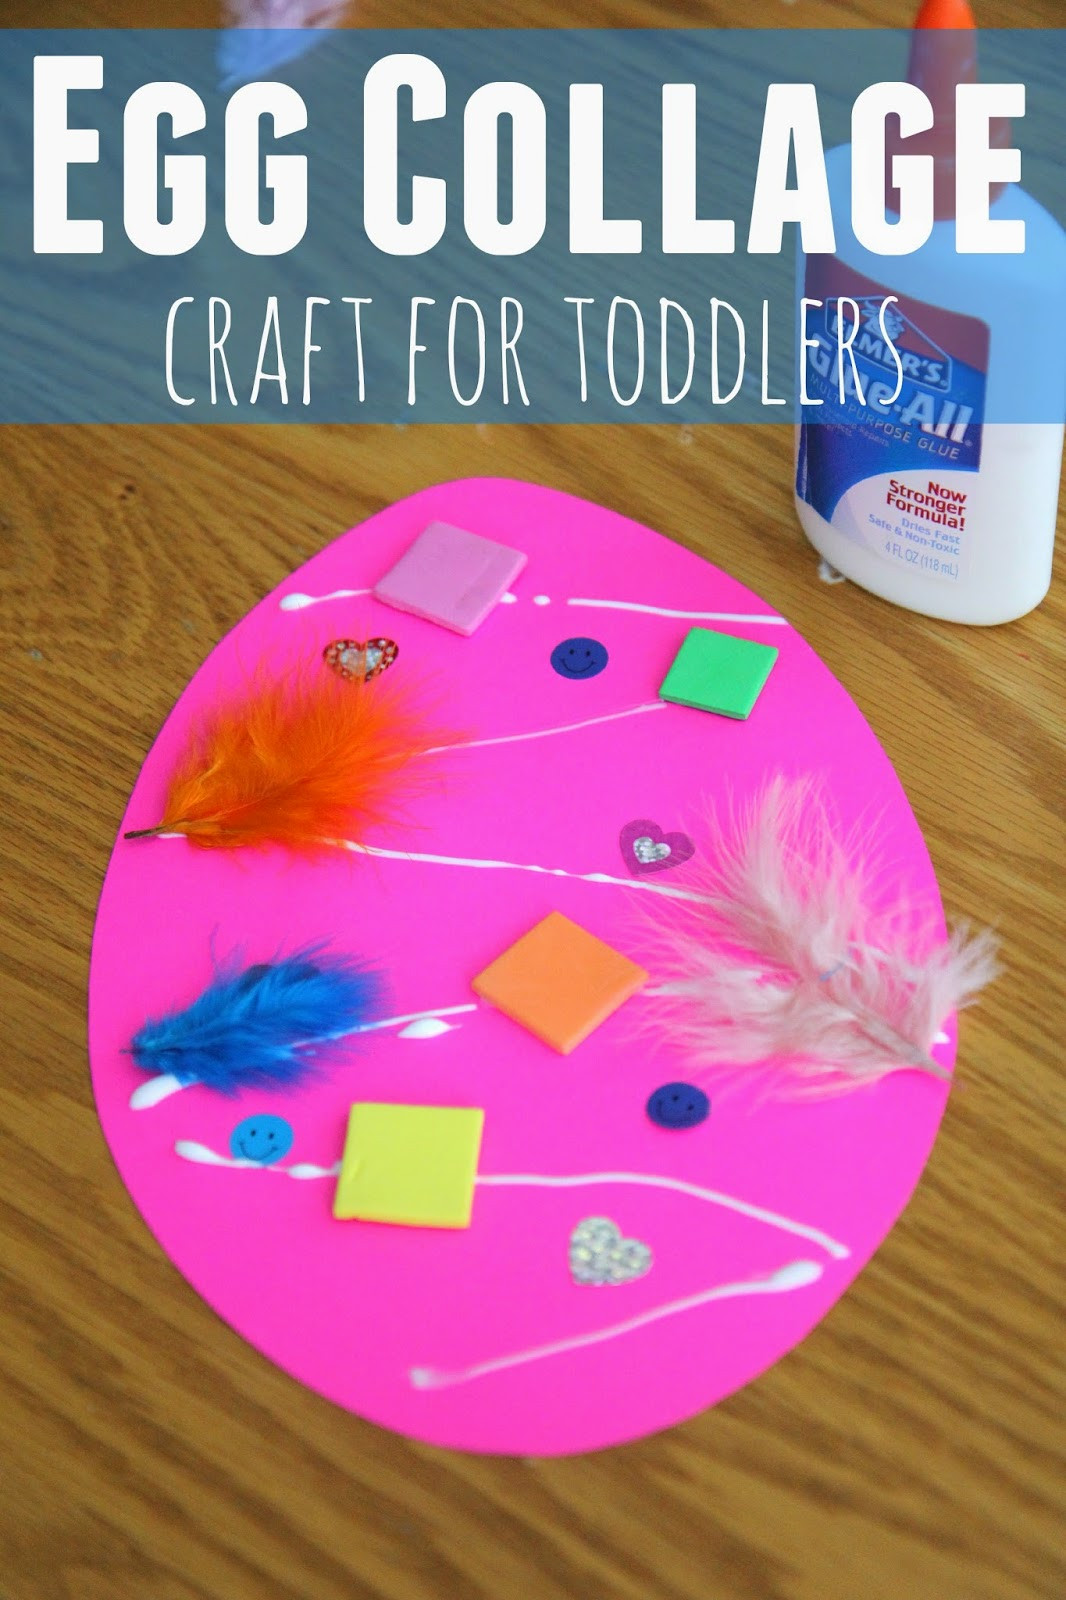 Toddler Art And Crafts Ideas
 Toddler Approved Easter Egg Collage Craft for Toddlers